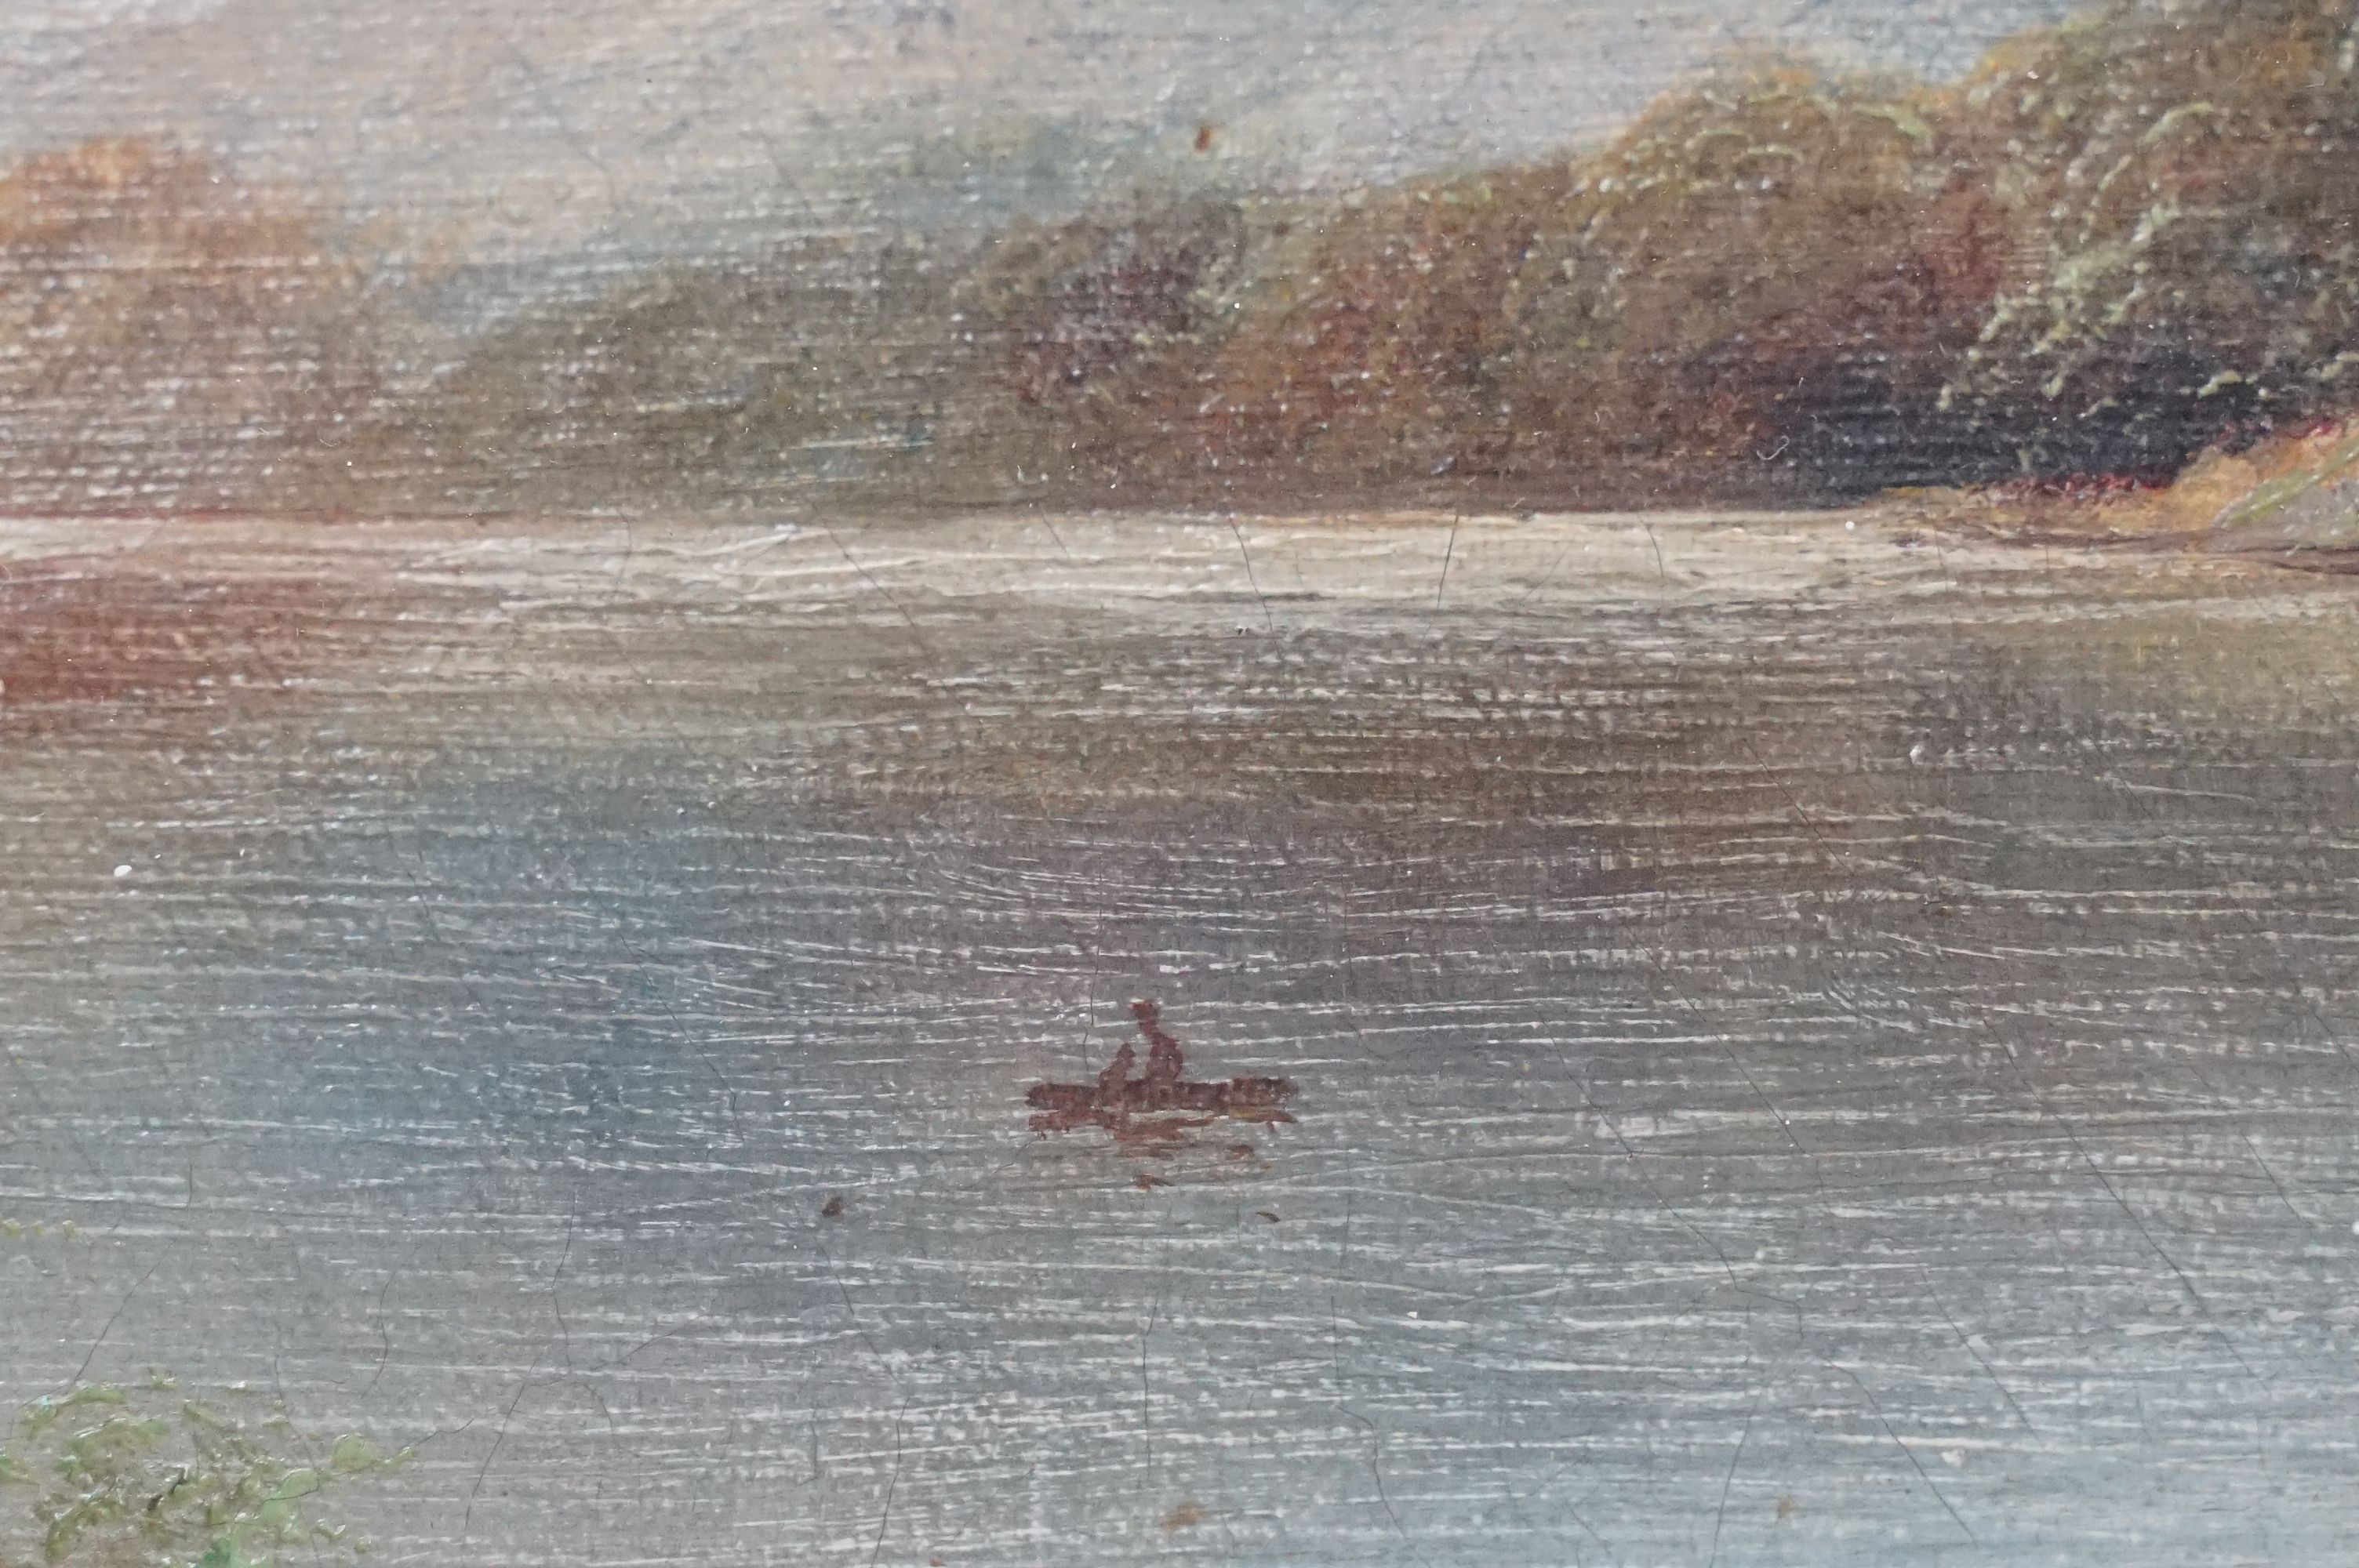 Swept gilt framed 19th century oil on canvas, Highland Loch View with figure and man in a boat, - Image 7 of 10